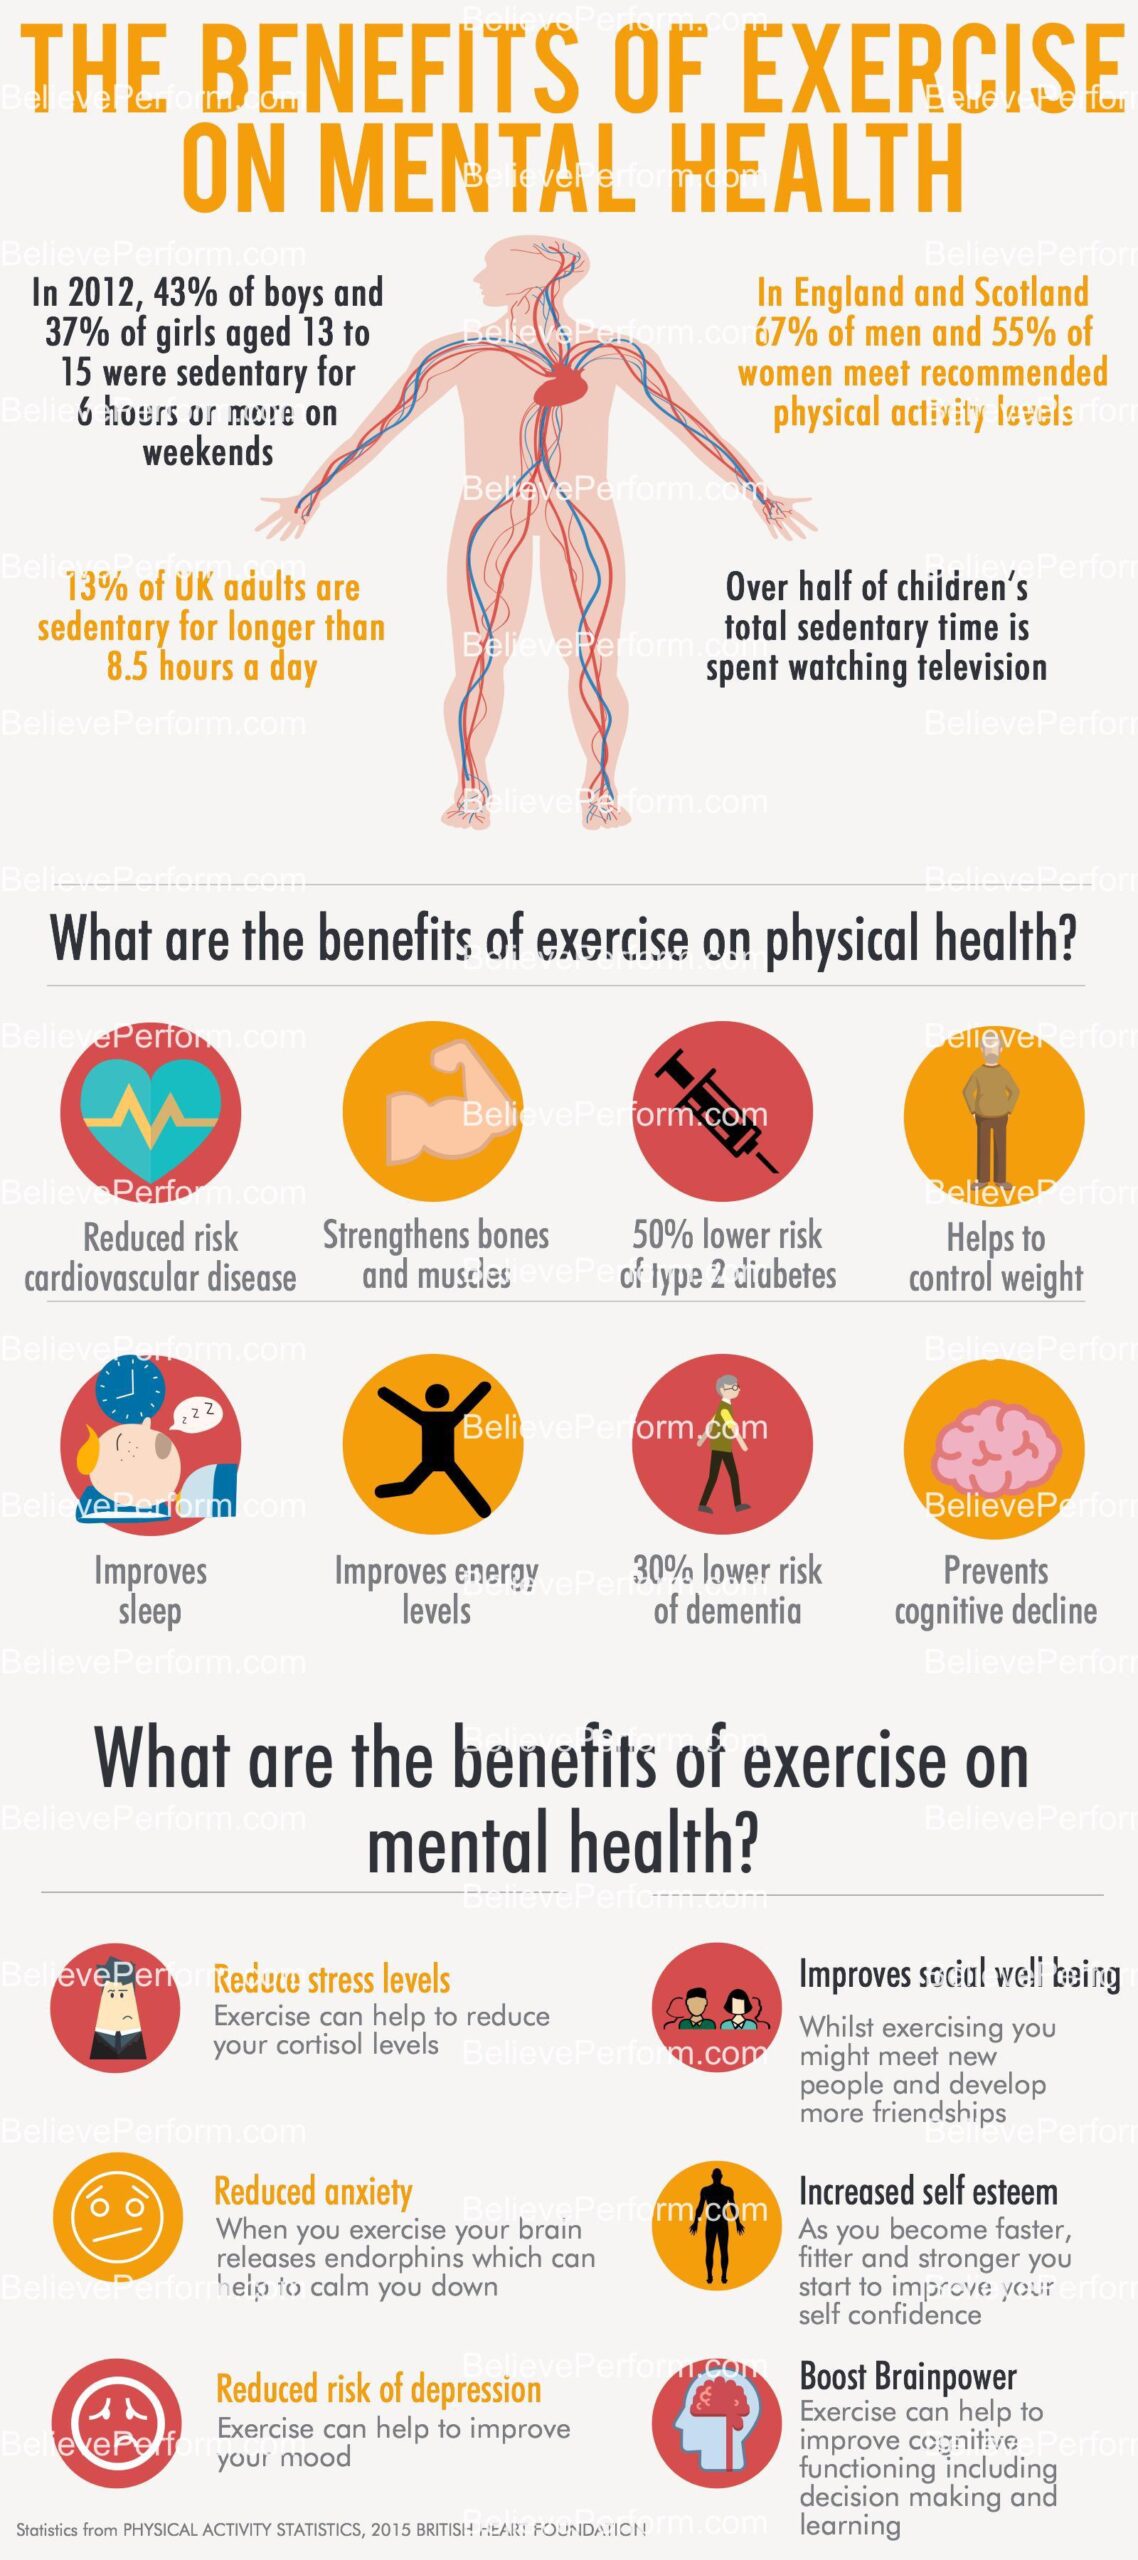 Why sport and exercise is important for children - BelievePerform